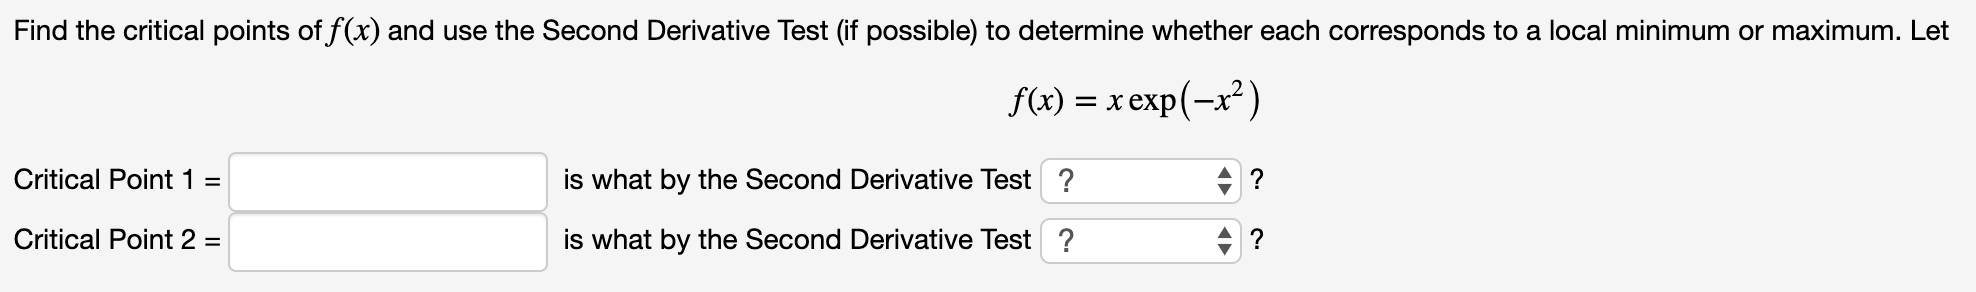 Find the critical points of f(x) and use the Second Derivative Test (if possible) to determine whether each corresponds to a local minimum or maximum. Let
f(x) xexp(-x2)
Critical Point 1
is what by the Second Derivative Test?
Critical Point 2 =
is what by the Second Derivative Test?
